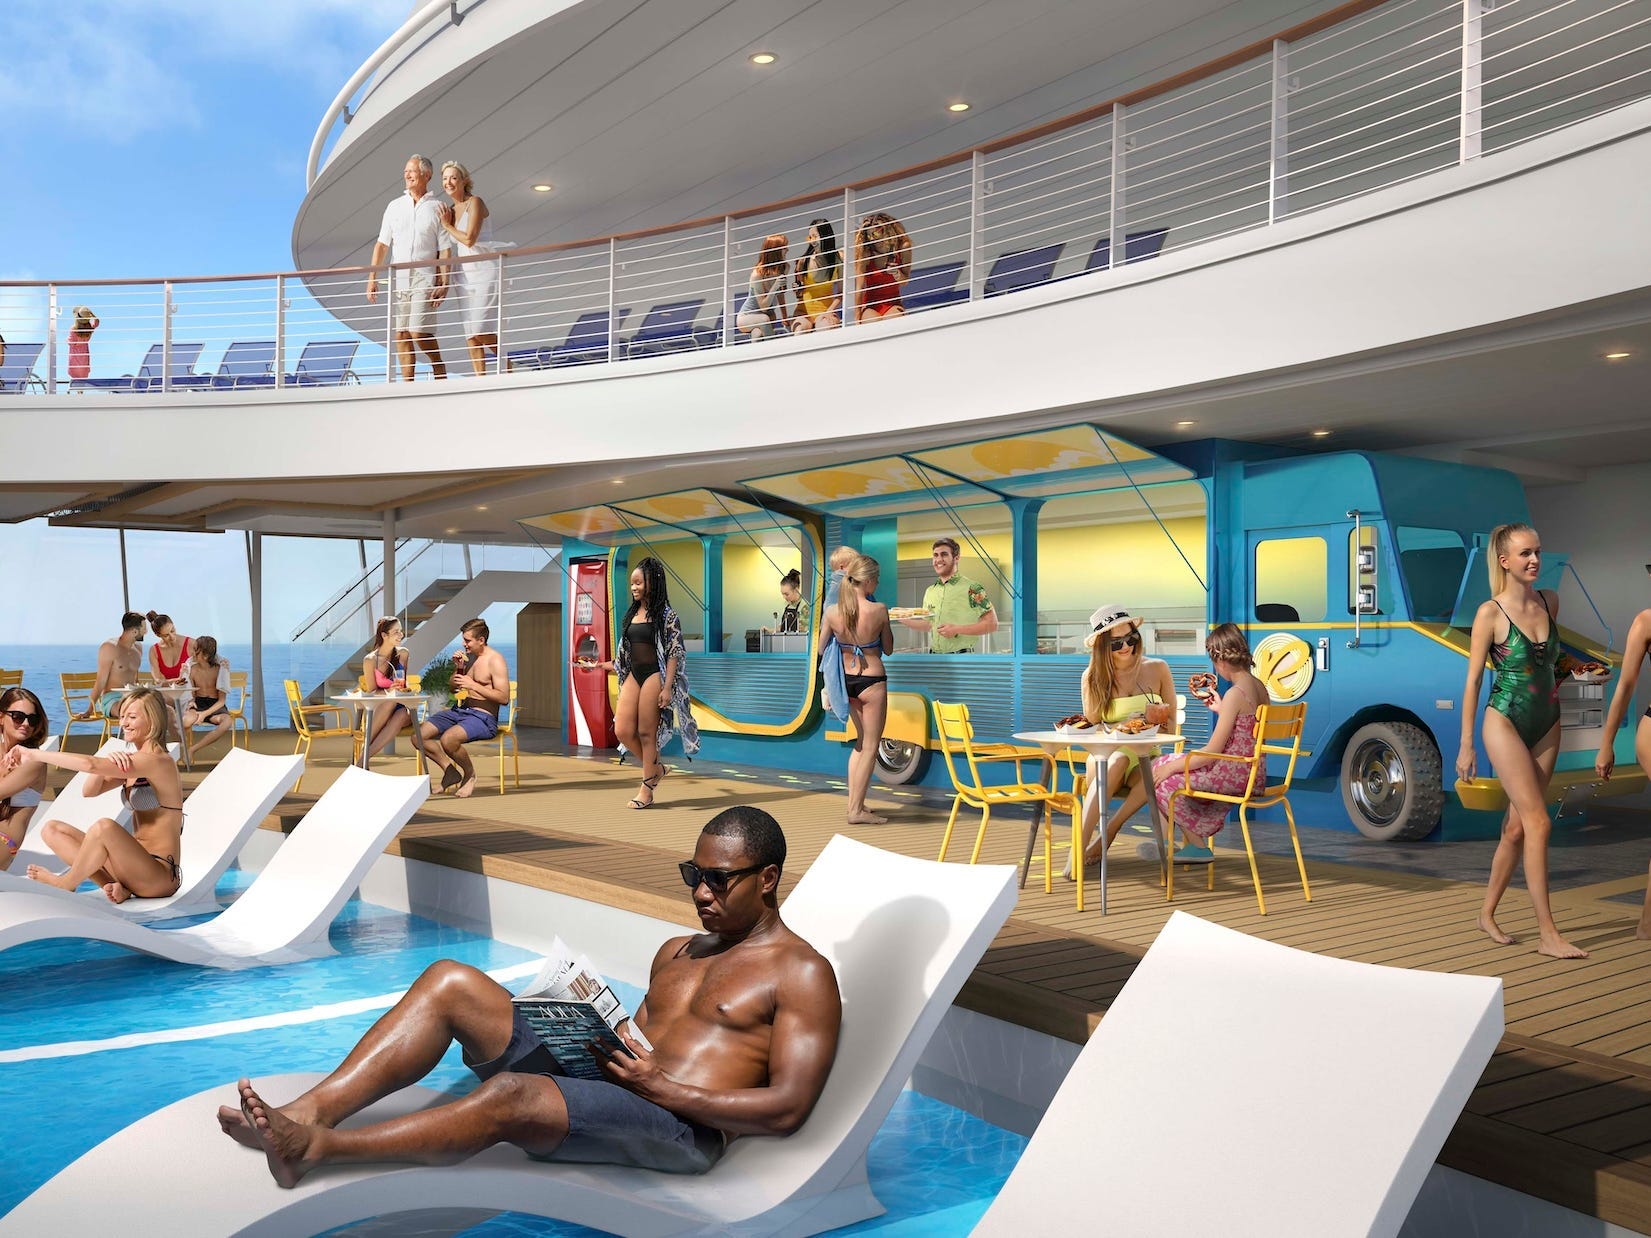 <p>It seems the company took a page from <a href="https://www.businessinsider.com/photos-review-new-11-billion-norwegian-prima-cruise-ship-2022-10">Norwegian Cruise Line's food truck-outfitted food hall </a>with its own dining kiosk on wheels. </p><p>Utopia's Spare Tire food truck serves snacks and handheld bites like pulled pork sandwiches and cheeseburger flatbreads.</p>